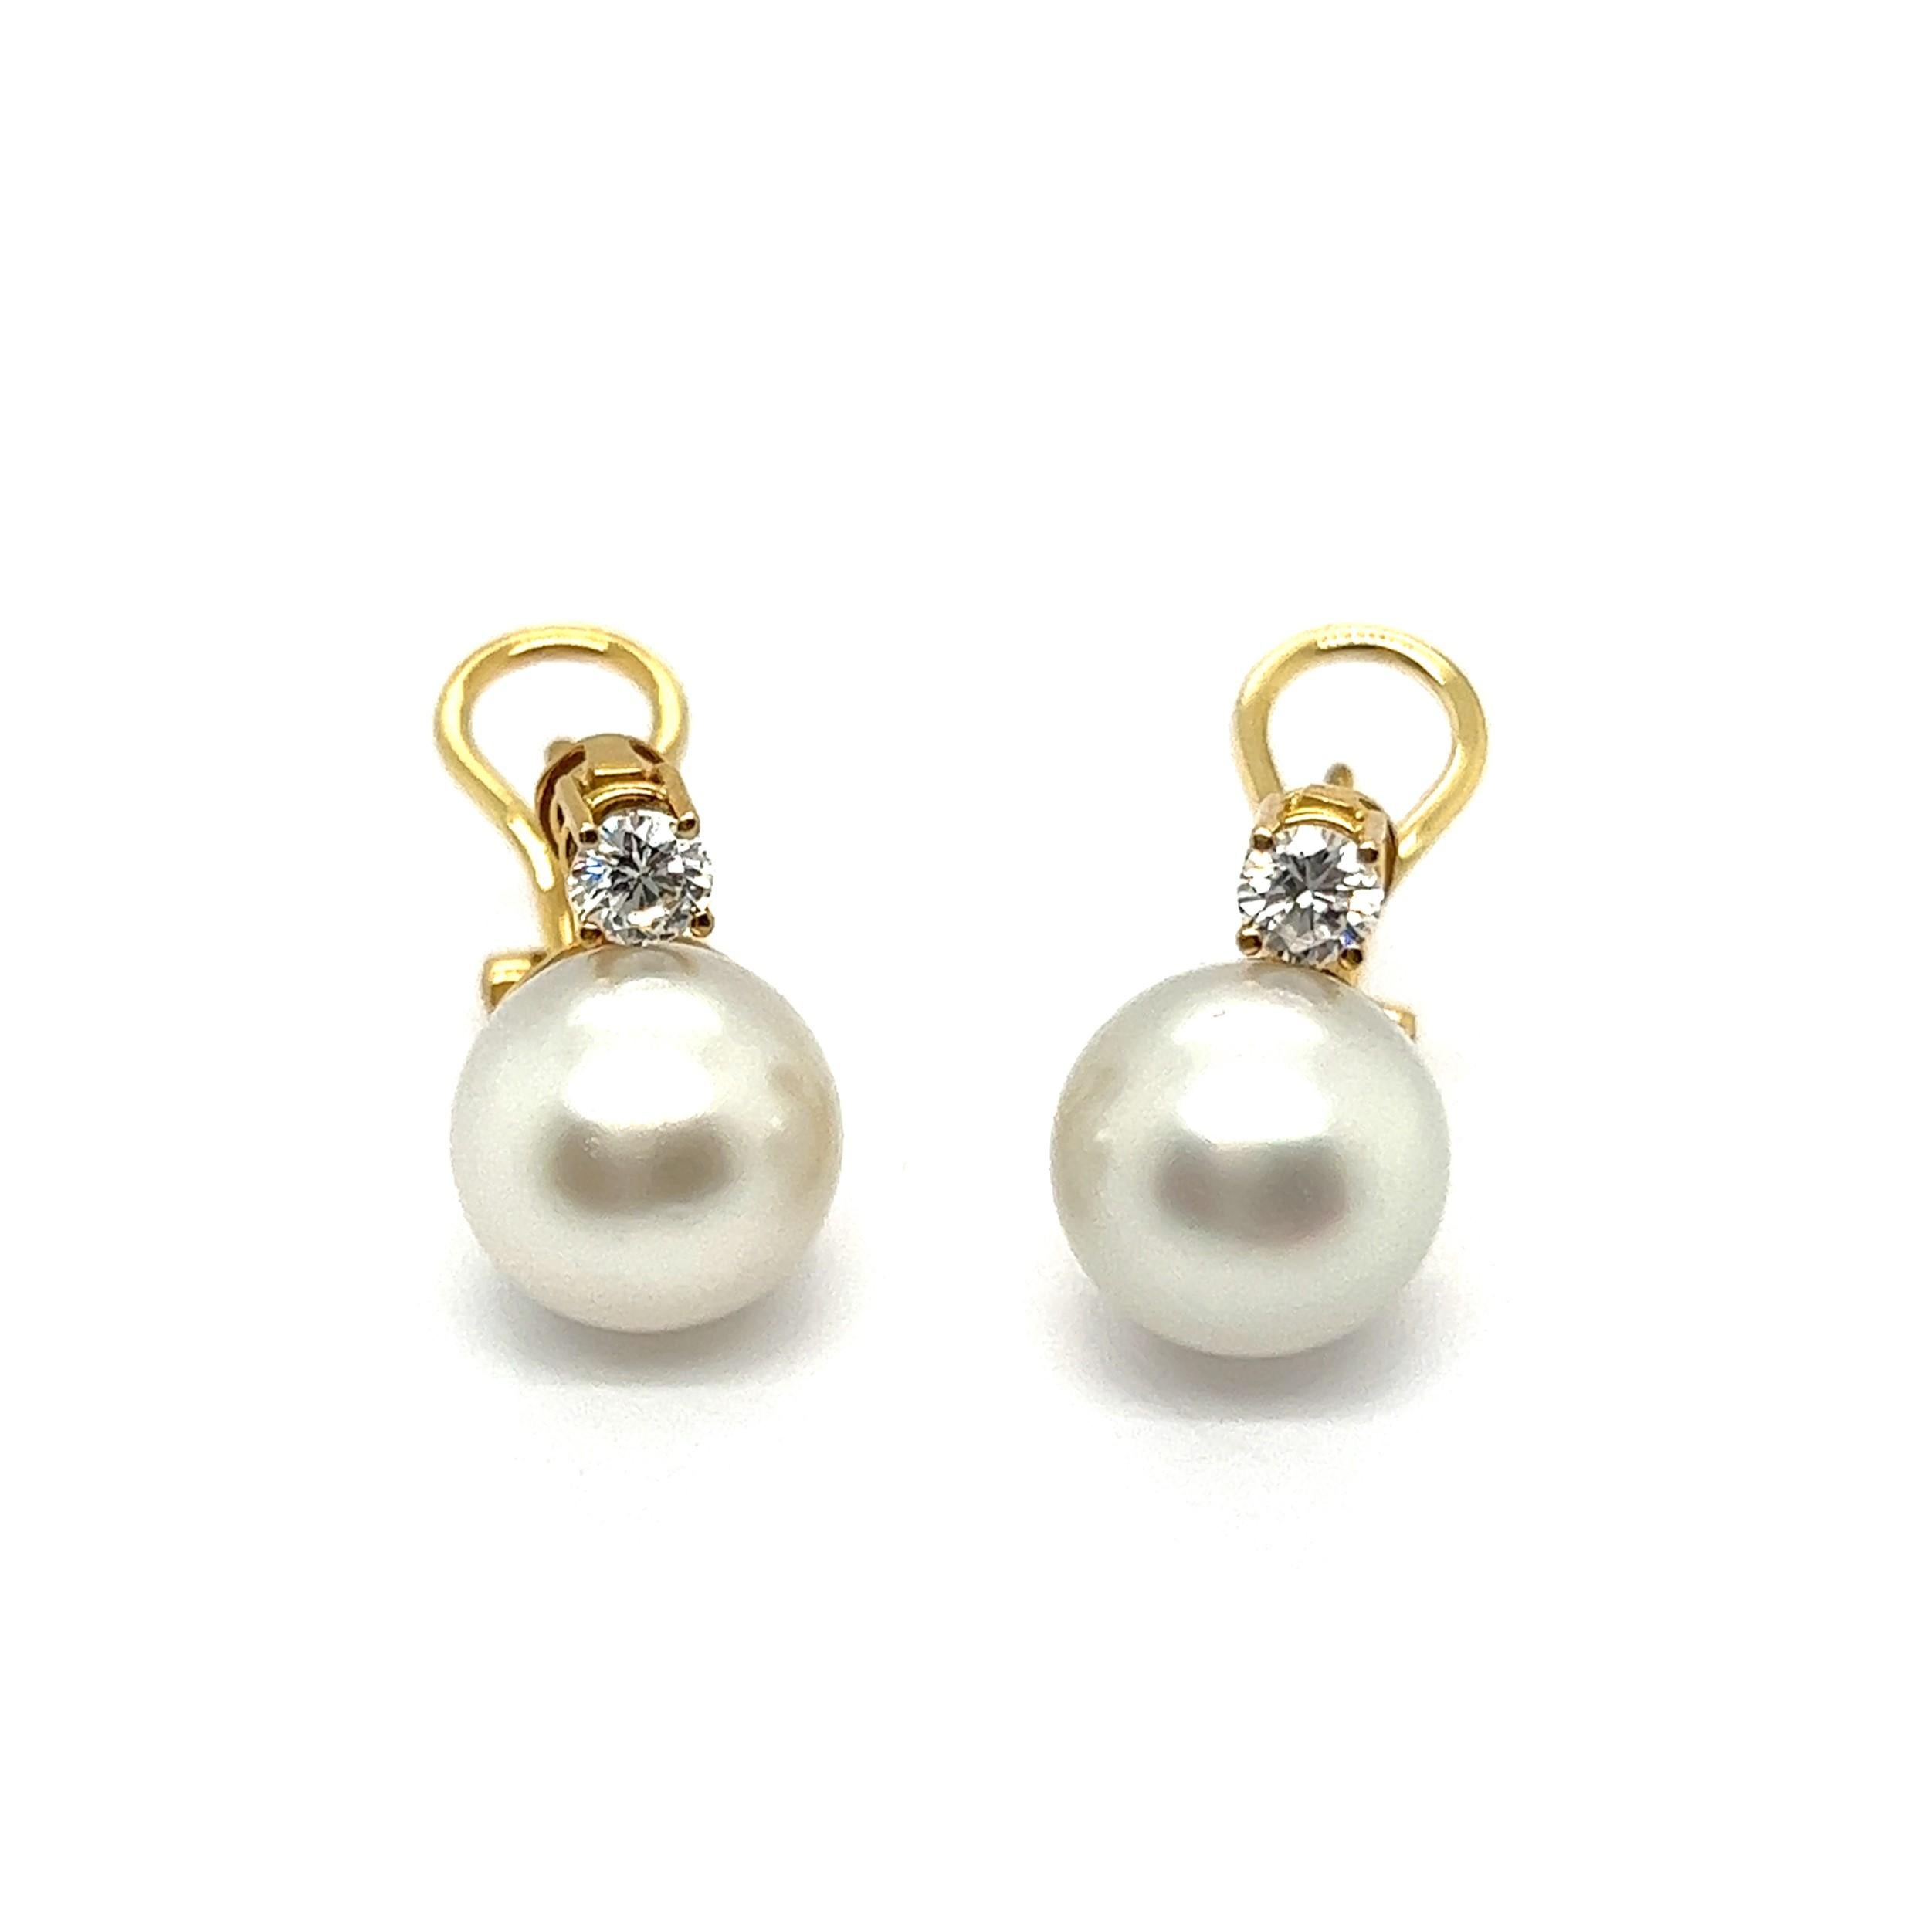 Ear clips with South Sea Pearls & Diamonds in 18 Karat Yellow Gold 2